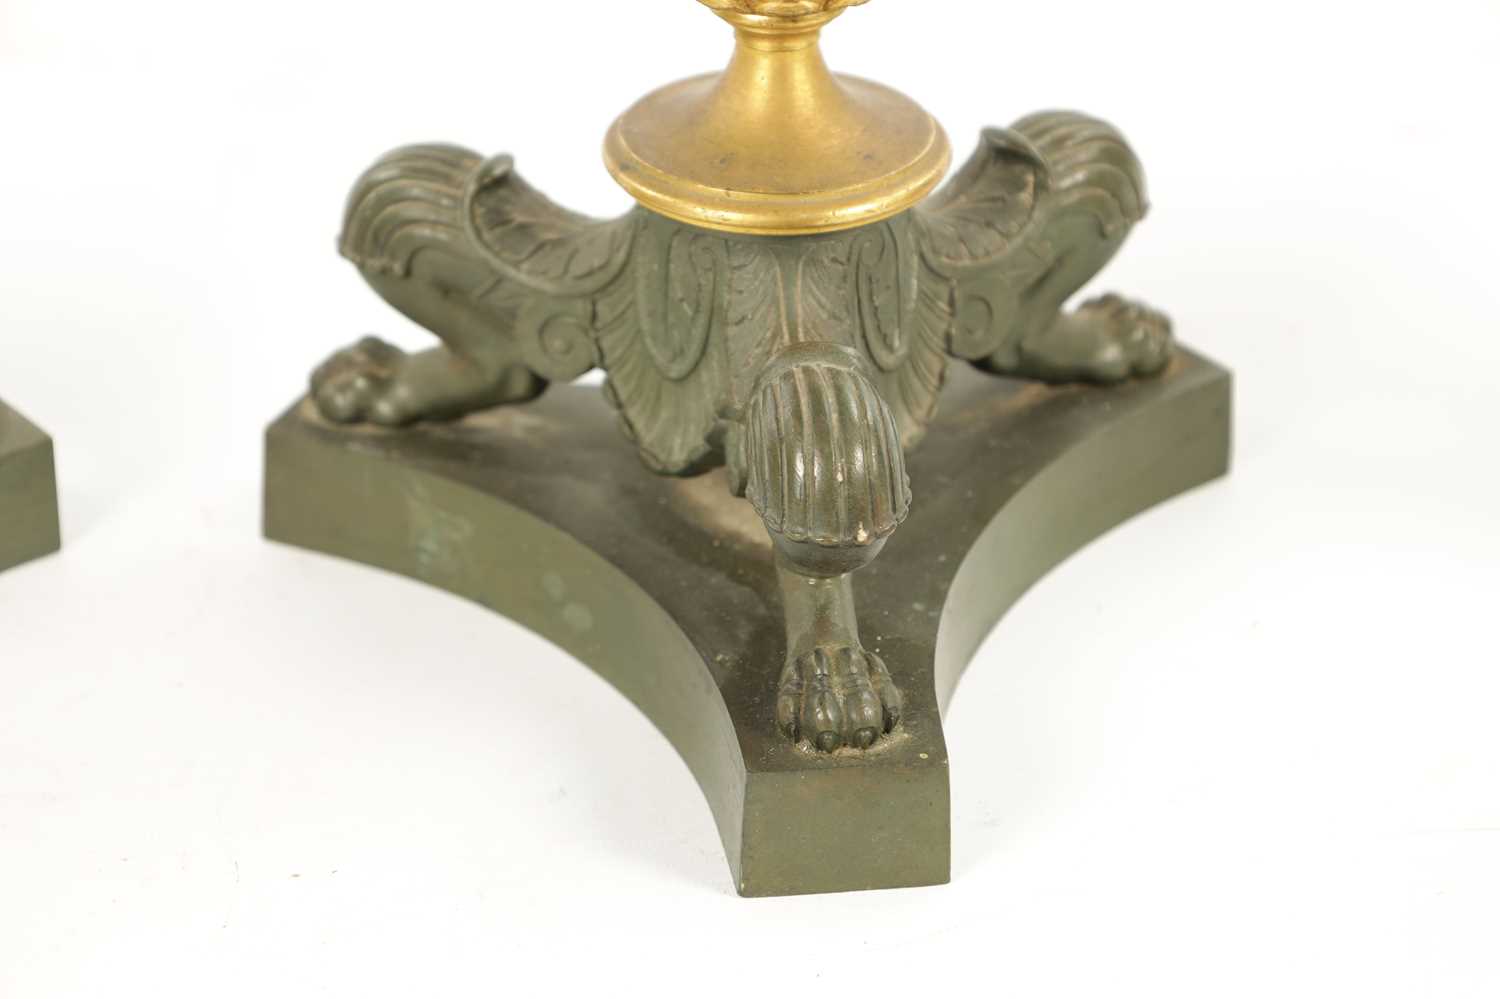 A PAIR OF REGENCY BRONZE AND ORMOLU CANDLESTICKS WITH LATER OIL LAMP FITTINGS - Image 3 of 12